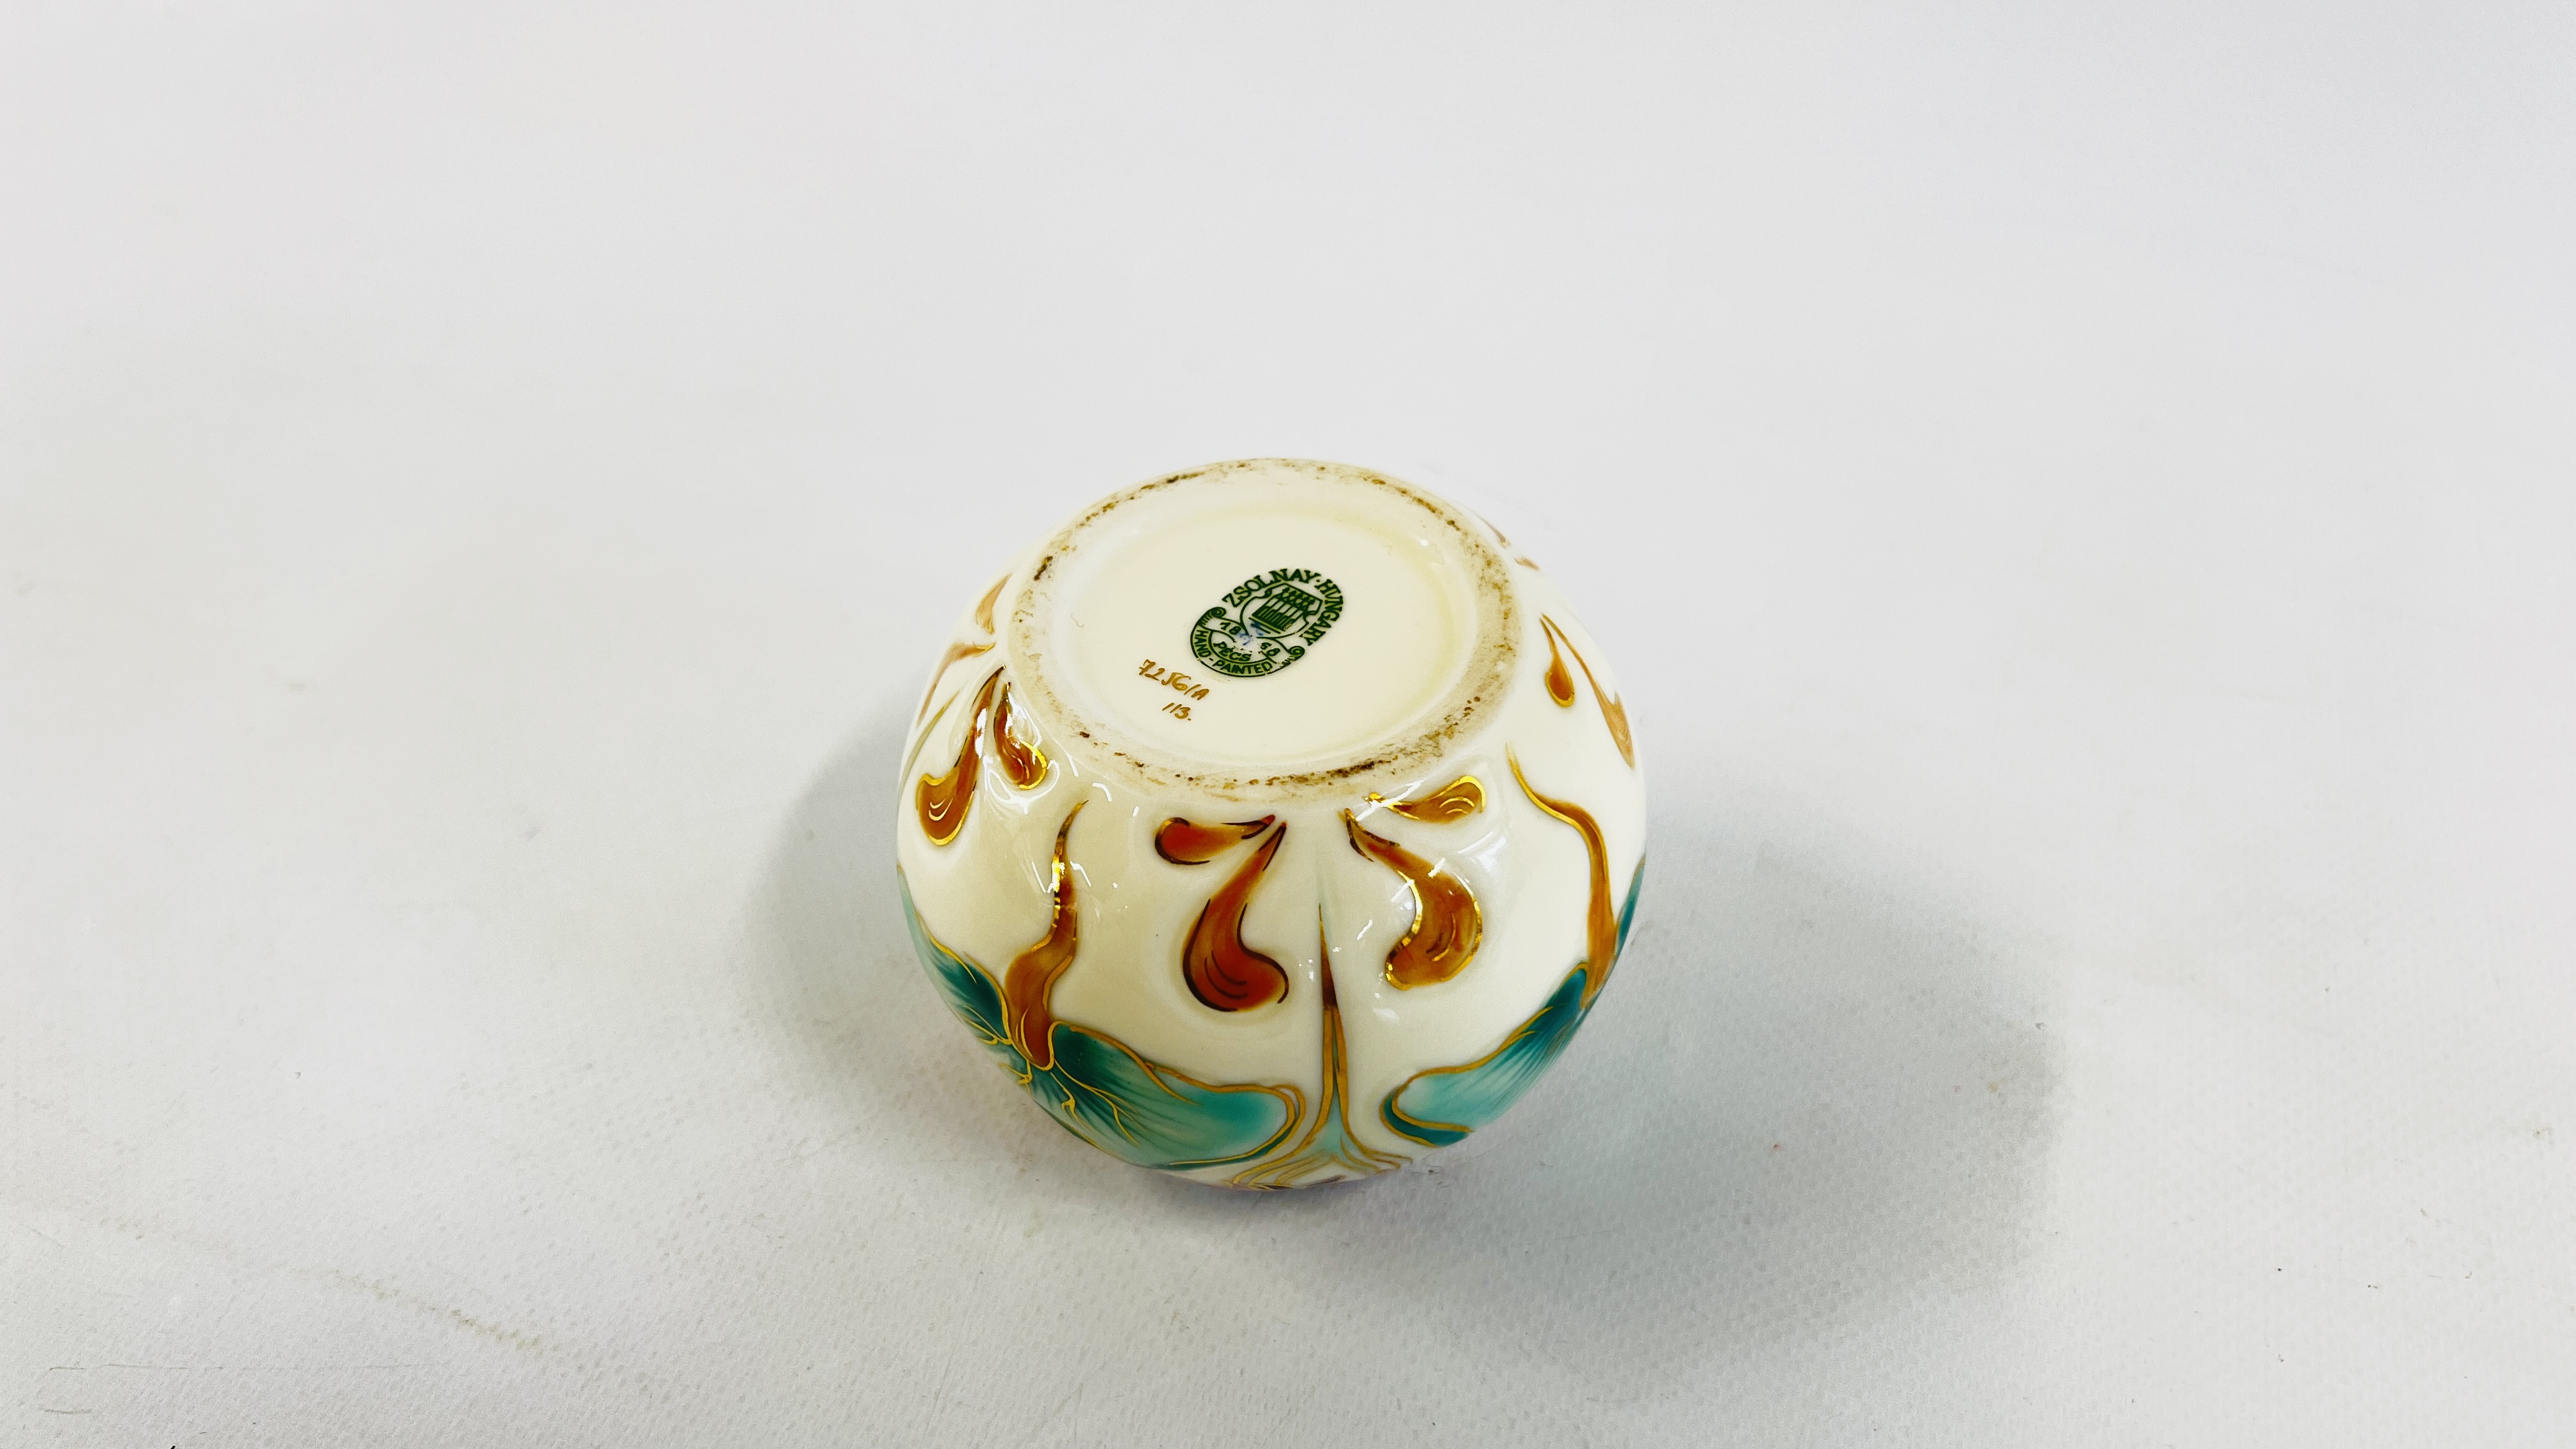 A VINTAGE "ZSOLNAY.HUNGARY" HAND PAINTED PORCELAIN VASE 72561A 113 DEPICTING MUSHROOMS H 6.5CM. - Image 4 of 5